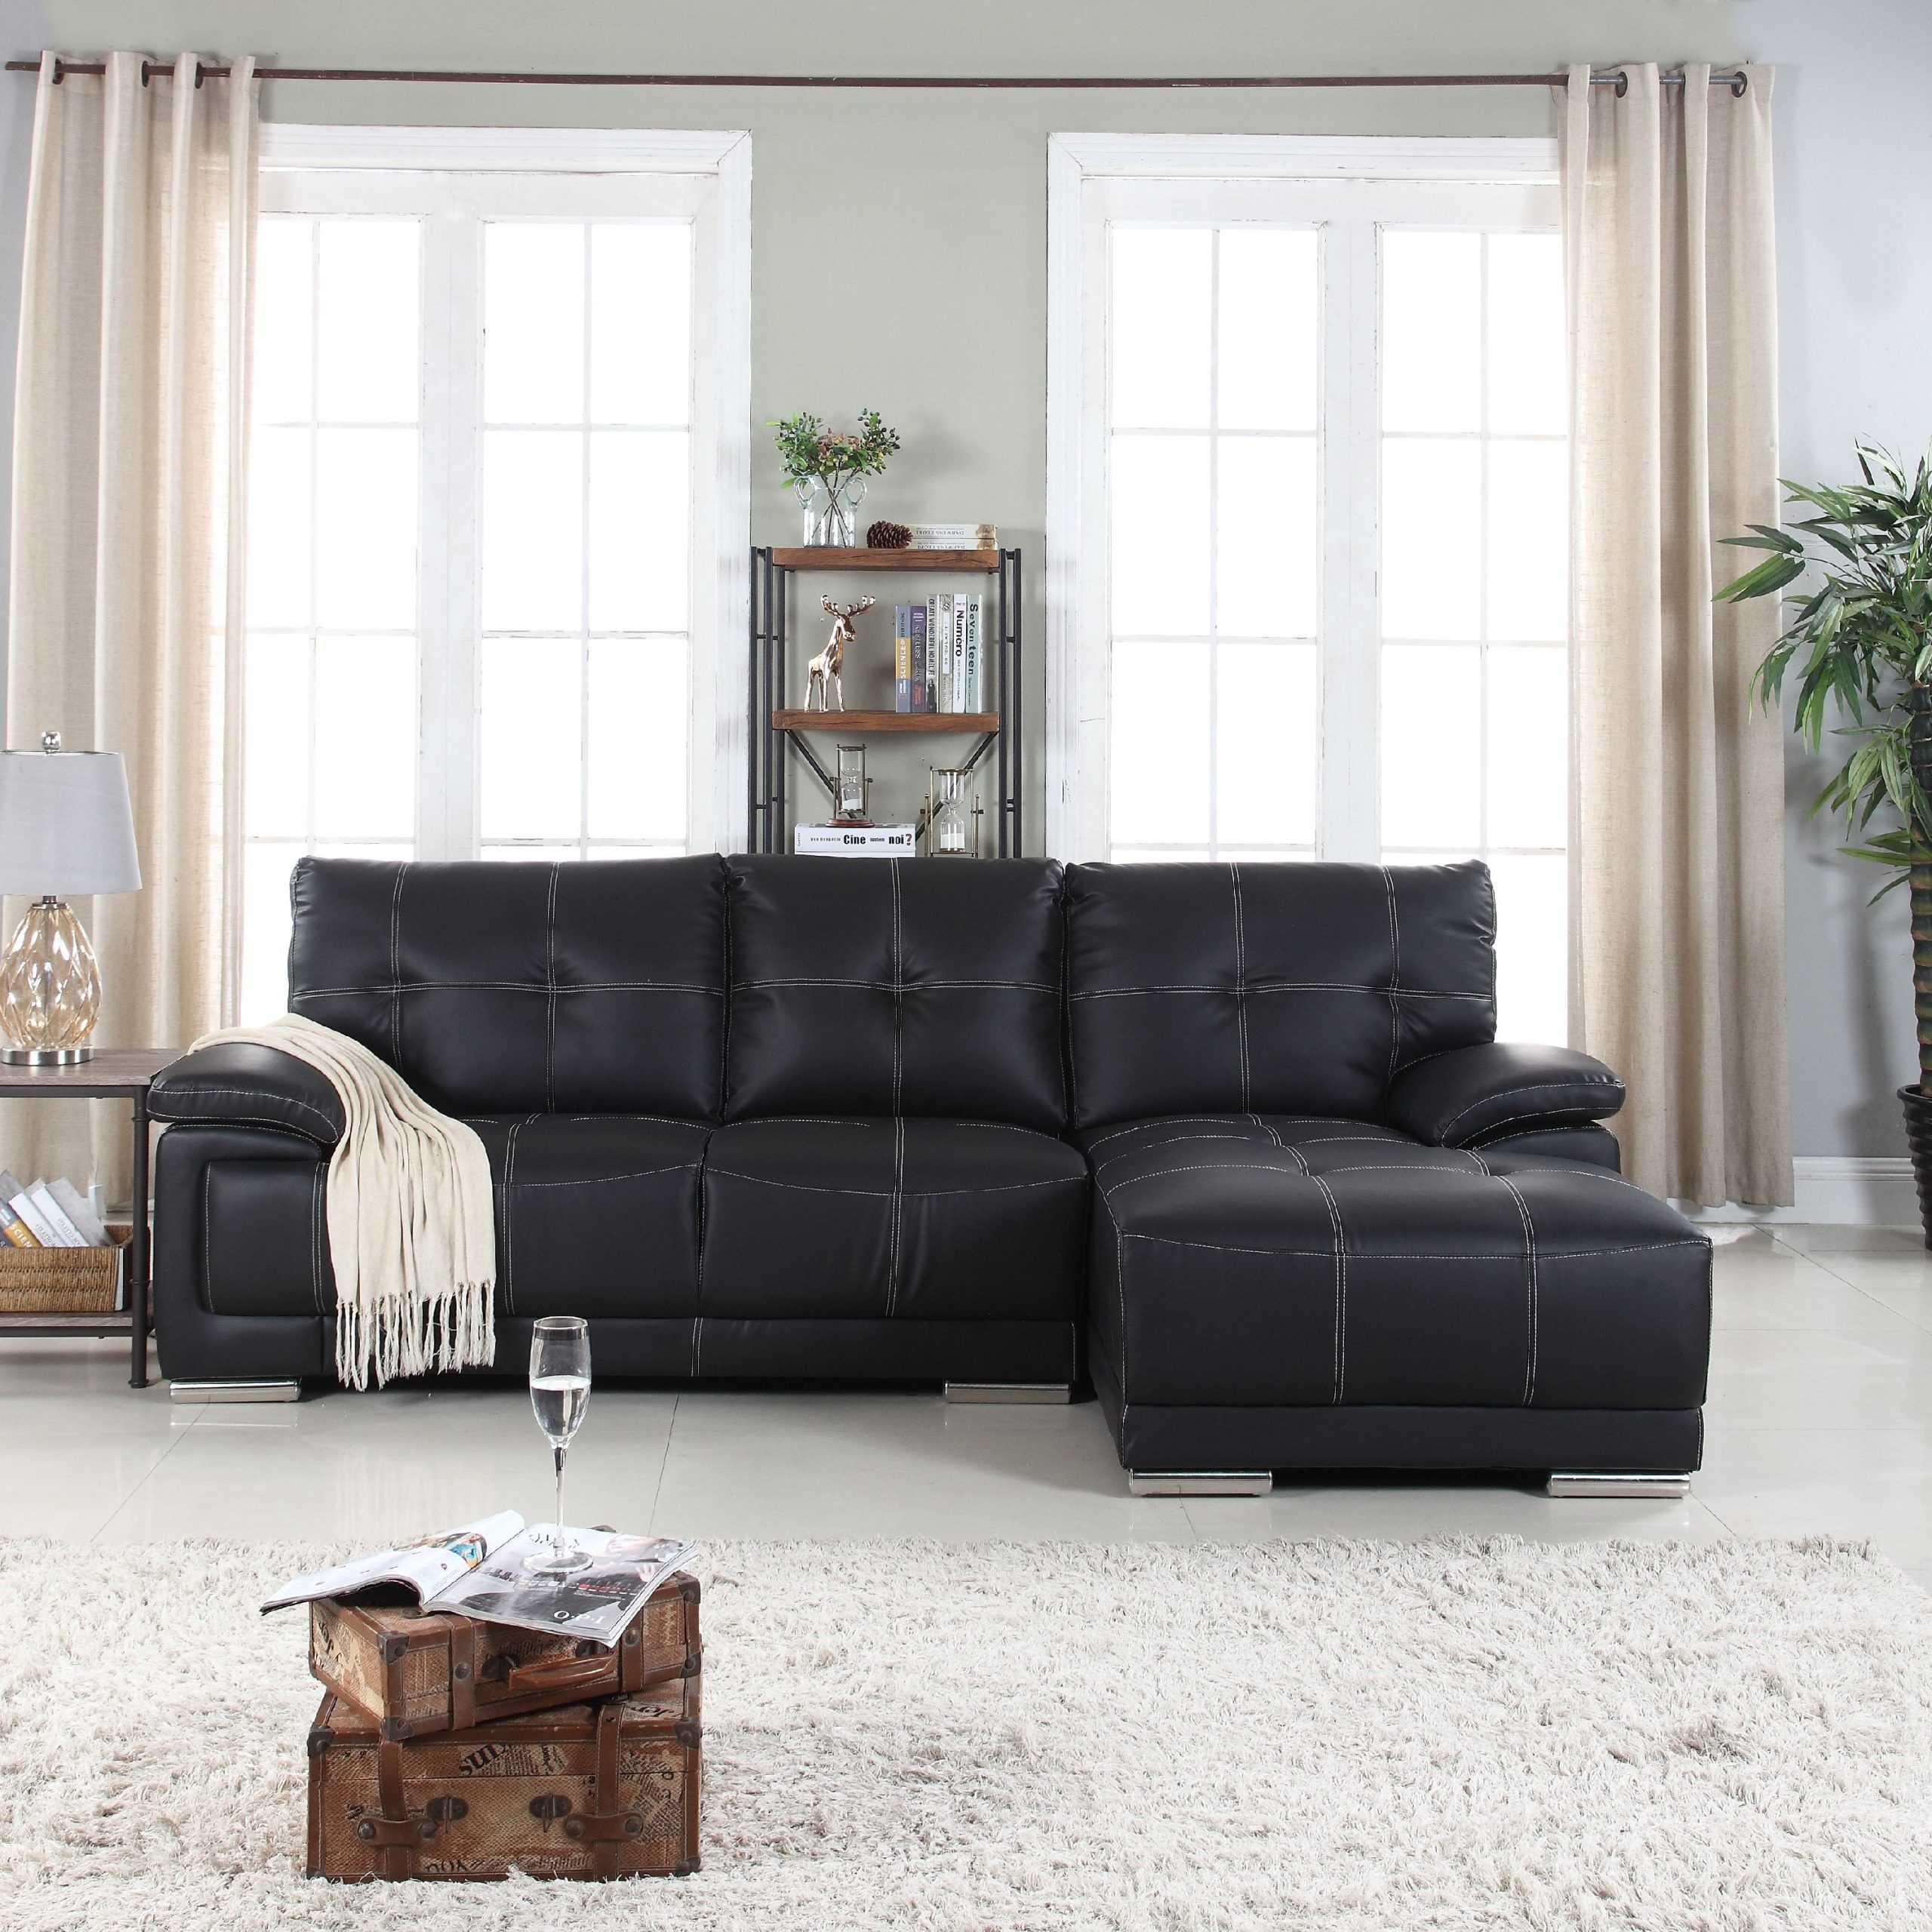 Classic Tufted Faux Leather Sectional Sofa – Walmart With Regard To Faux Leather Sofas (View 13 of 21)